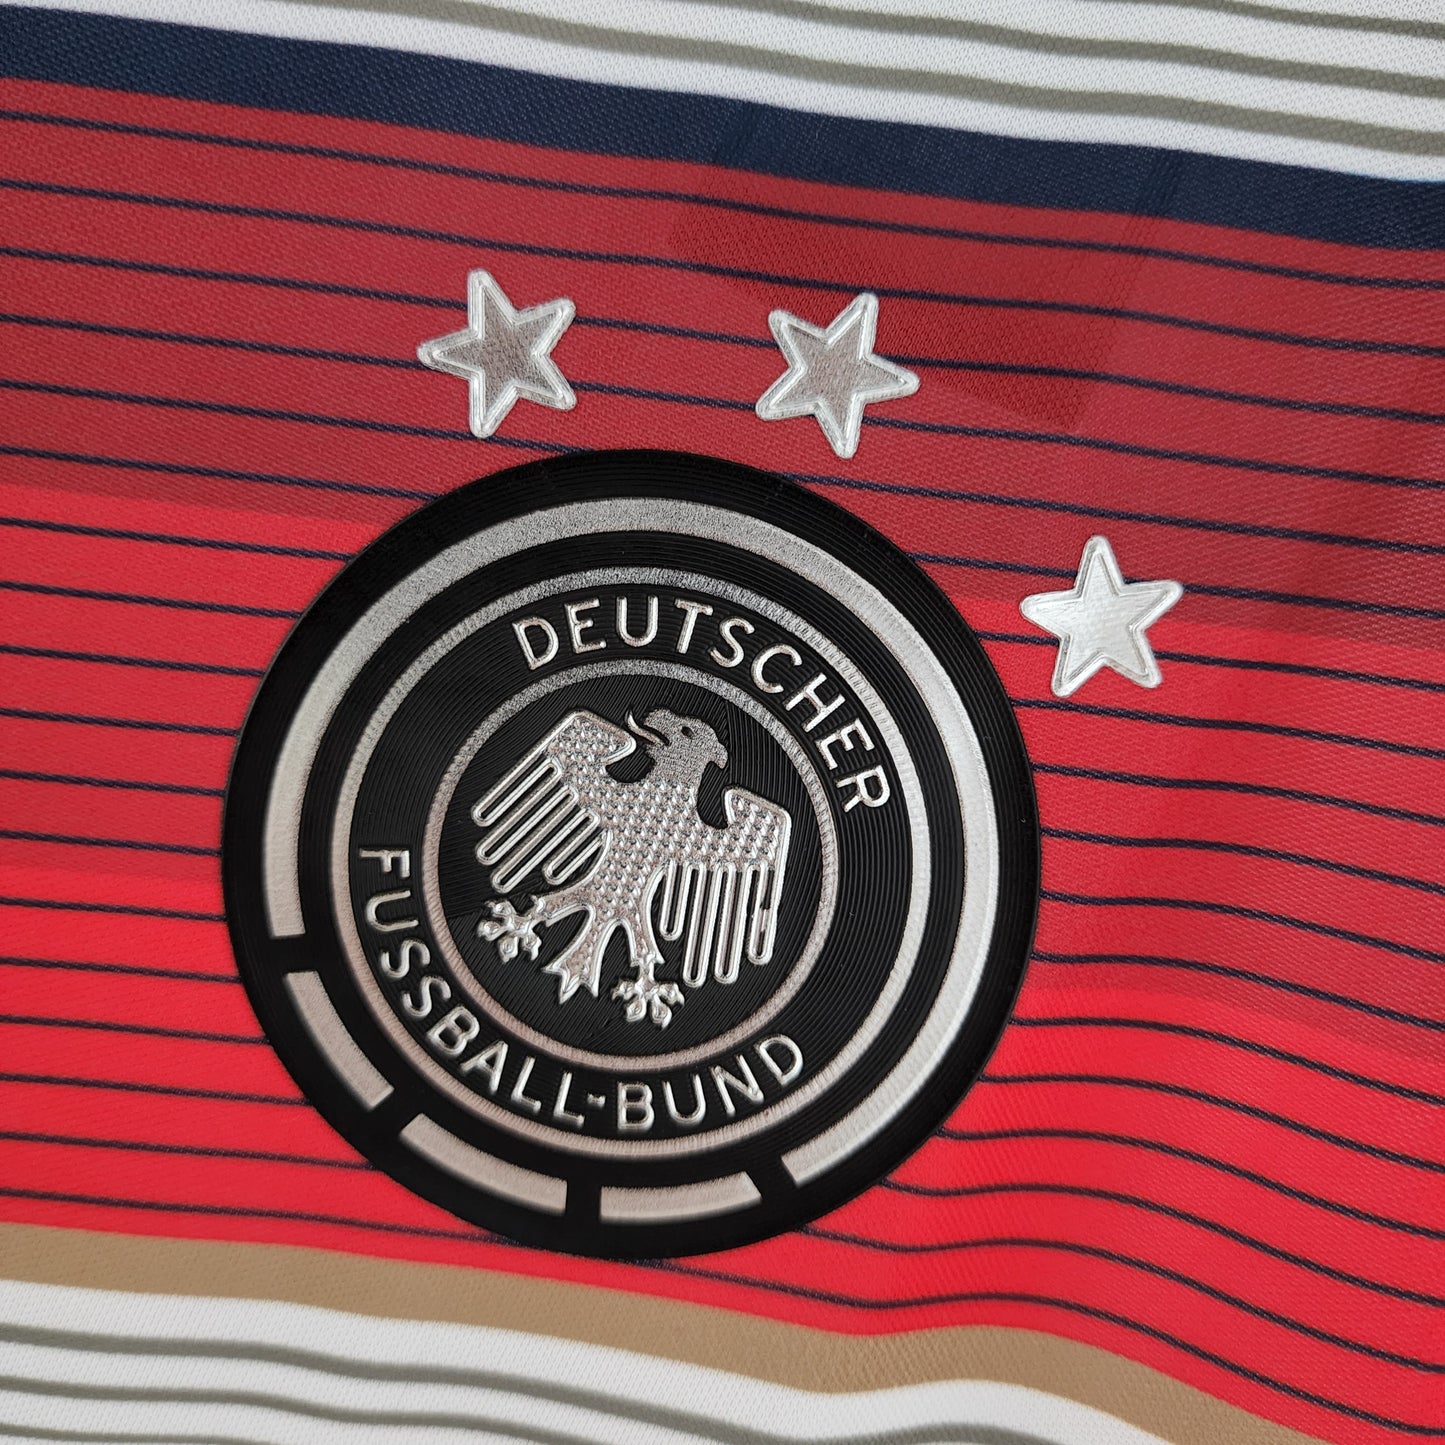 Germany 2014 Home Jersey - World Cup Winners